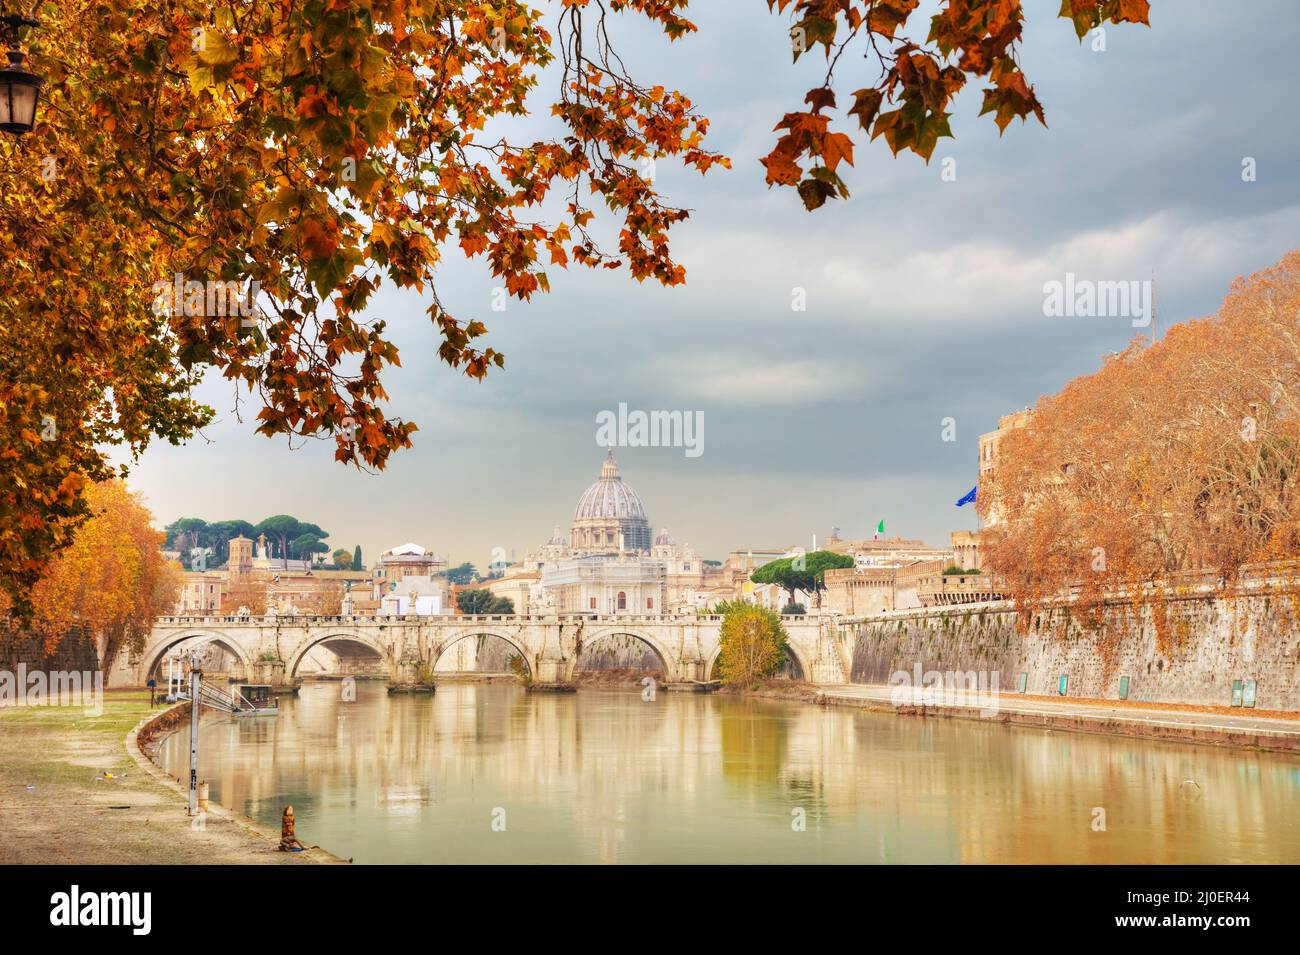 Rome overview with the Papal Basilica of St. Peter in the Vatican city Stock Photo